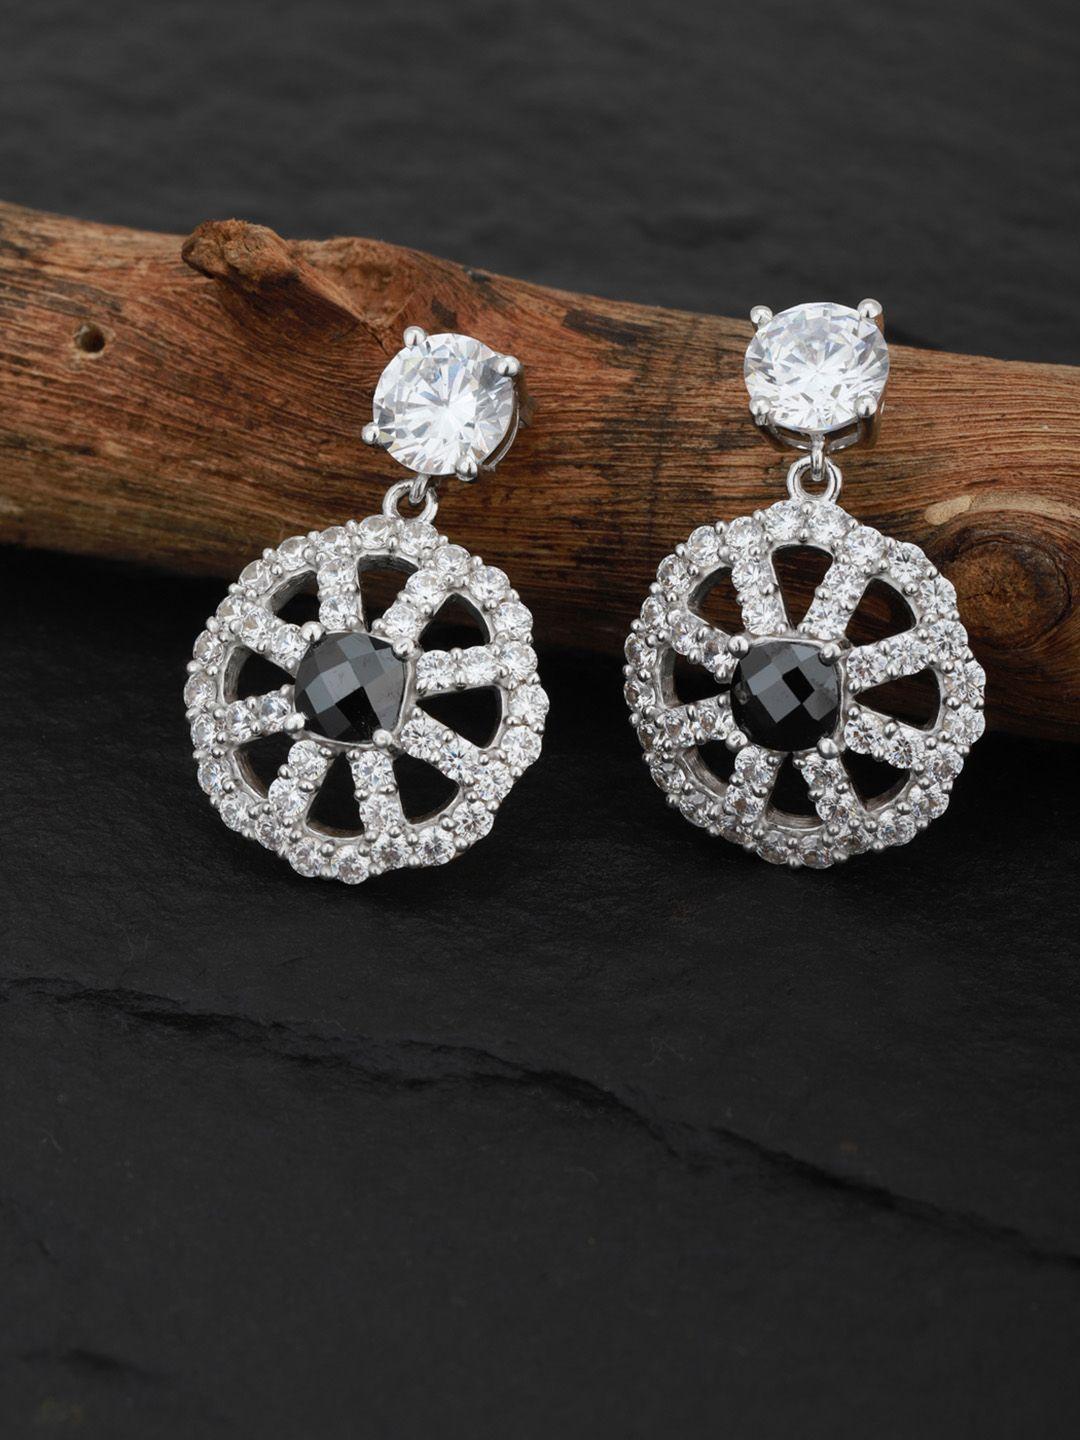 carlton london silver-toned & black rhodium-plated cz-studded handcrafted drop earrings